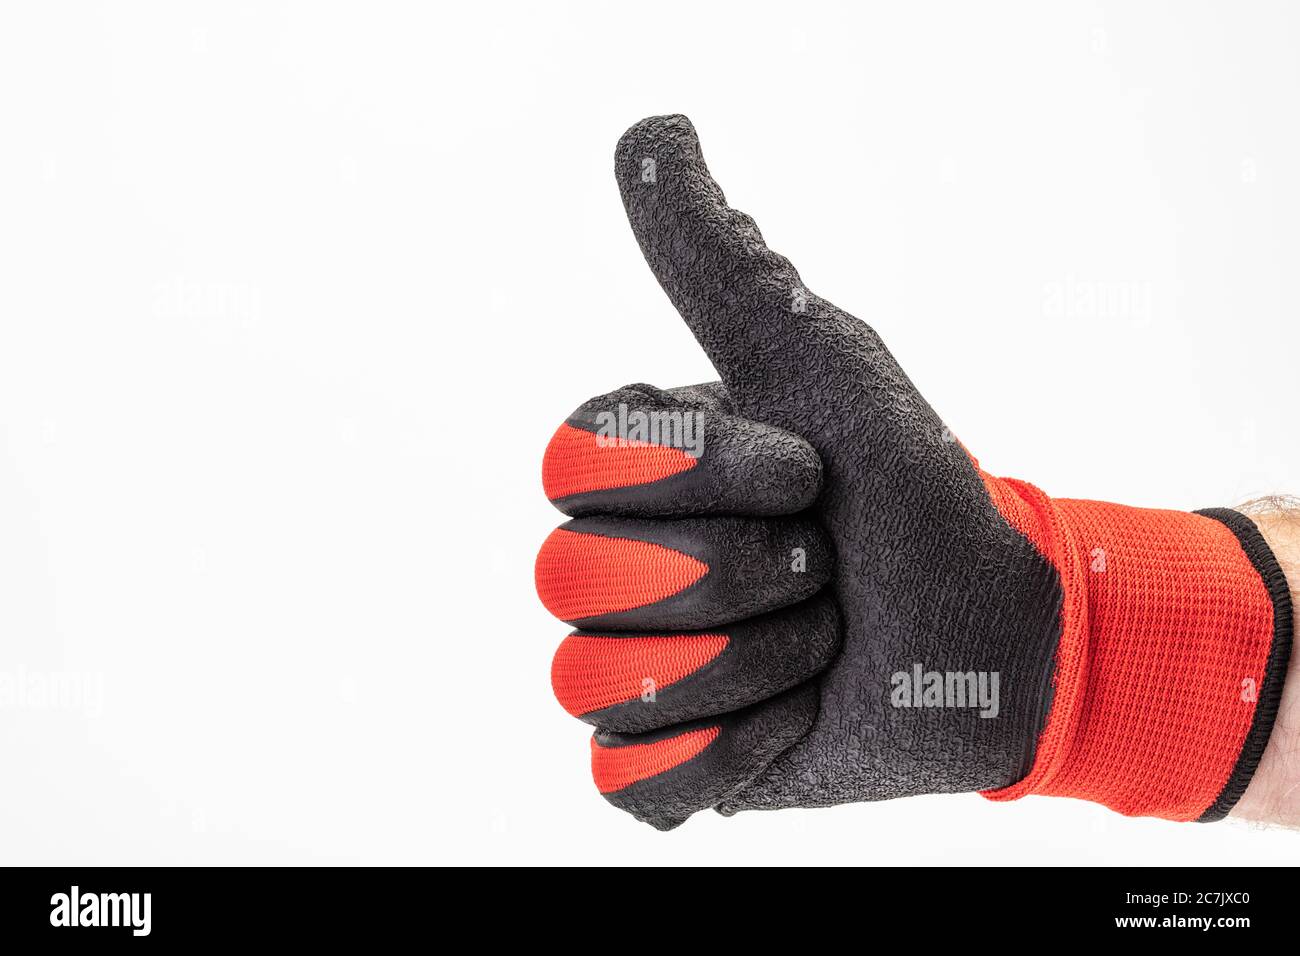 Male hand with gardening glove, thumbs up, white background, Stock Photo